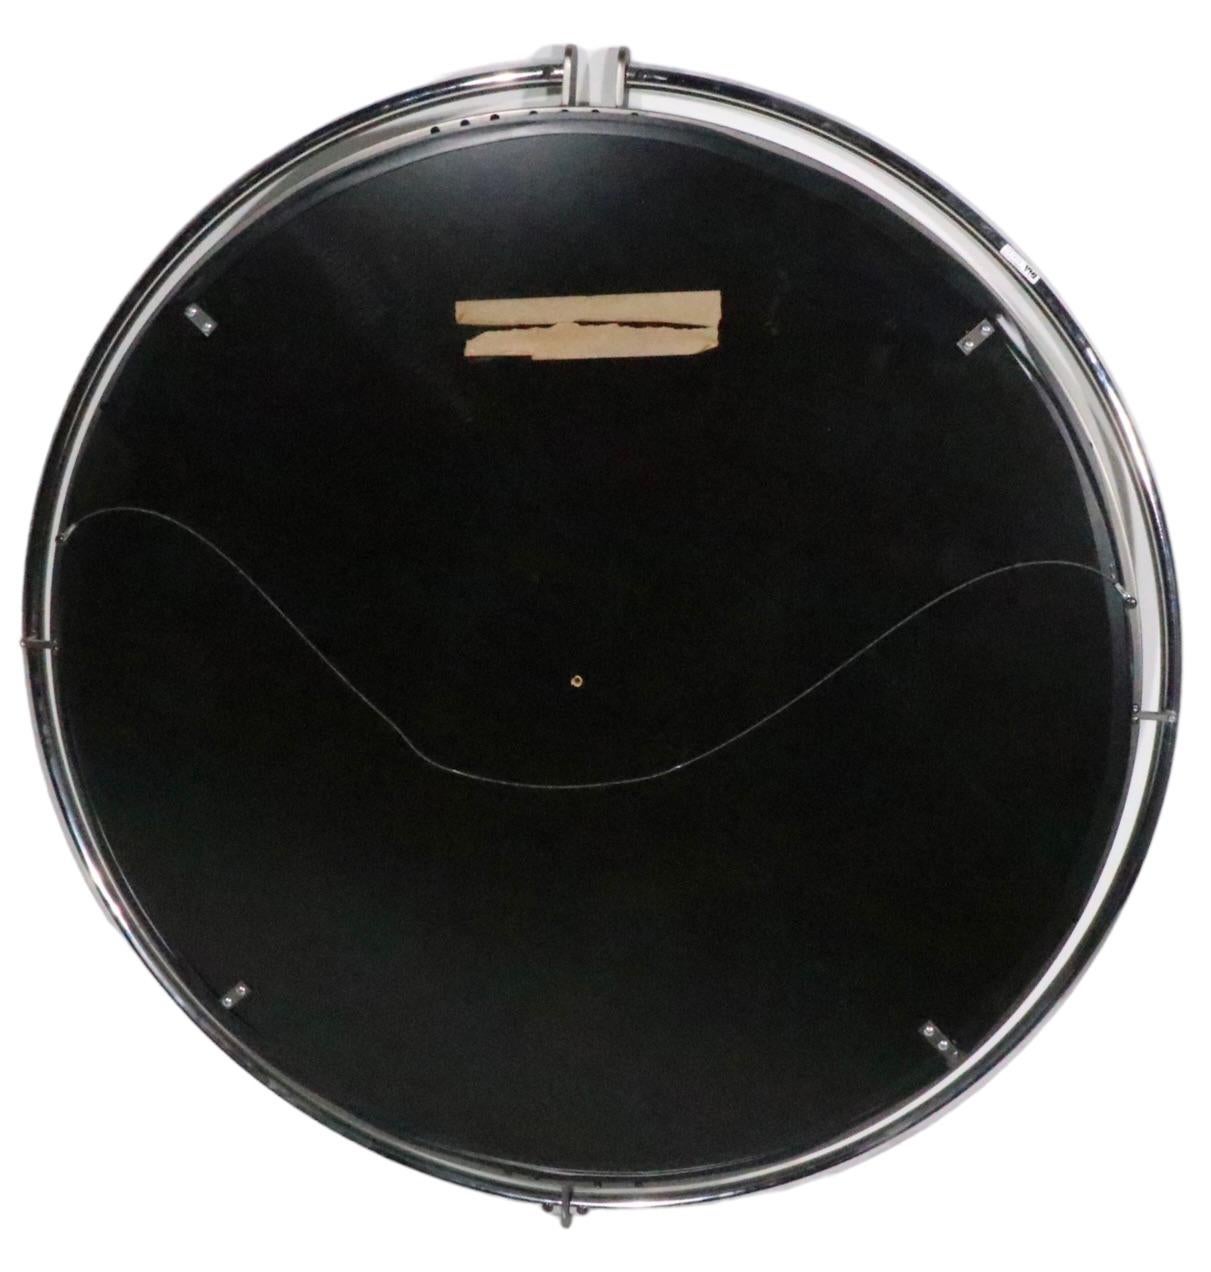 Spectacular Hollywood Regency, Art Deco Revival mirror by Design Institute America, circa 1992. The mirror is constructed of a center panel, of bevelled glass ( Dia. 36 in. ) surrounded by a tubular chrome ring  ( Dia. 40.5 in. ). Exceptional